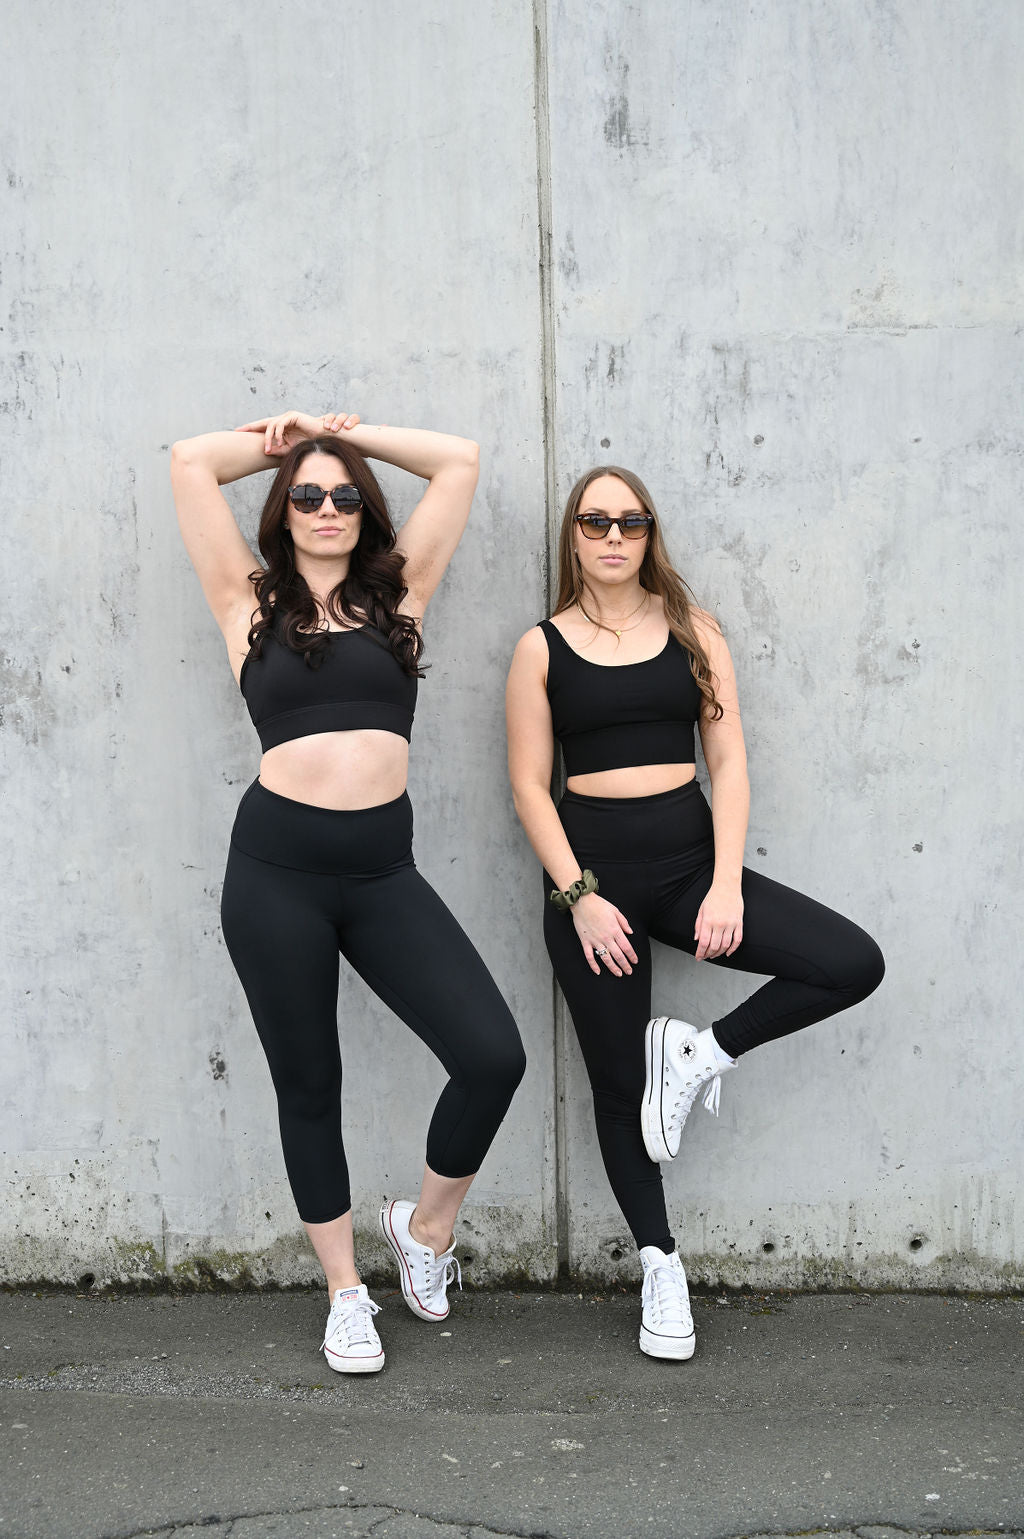 New Look fans rave about 'comfortable' £18 leggings that are